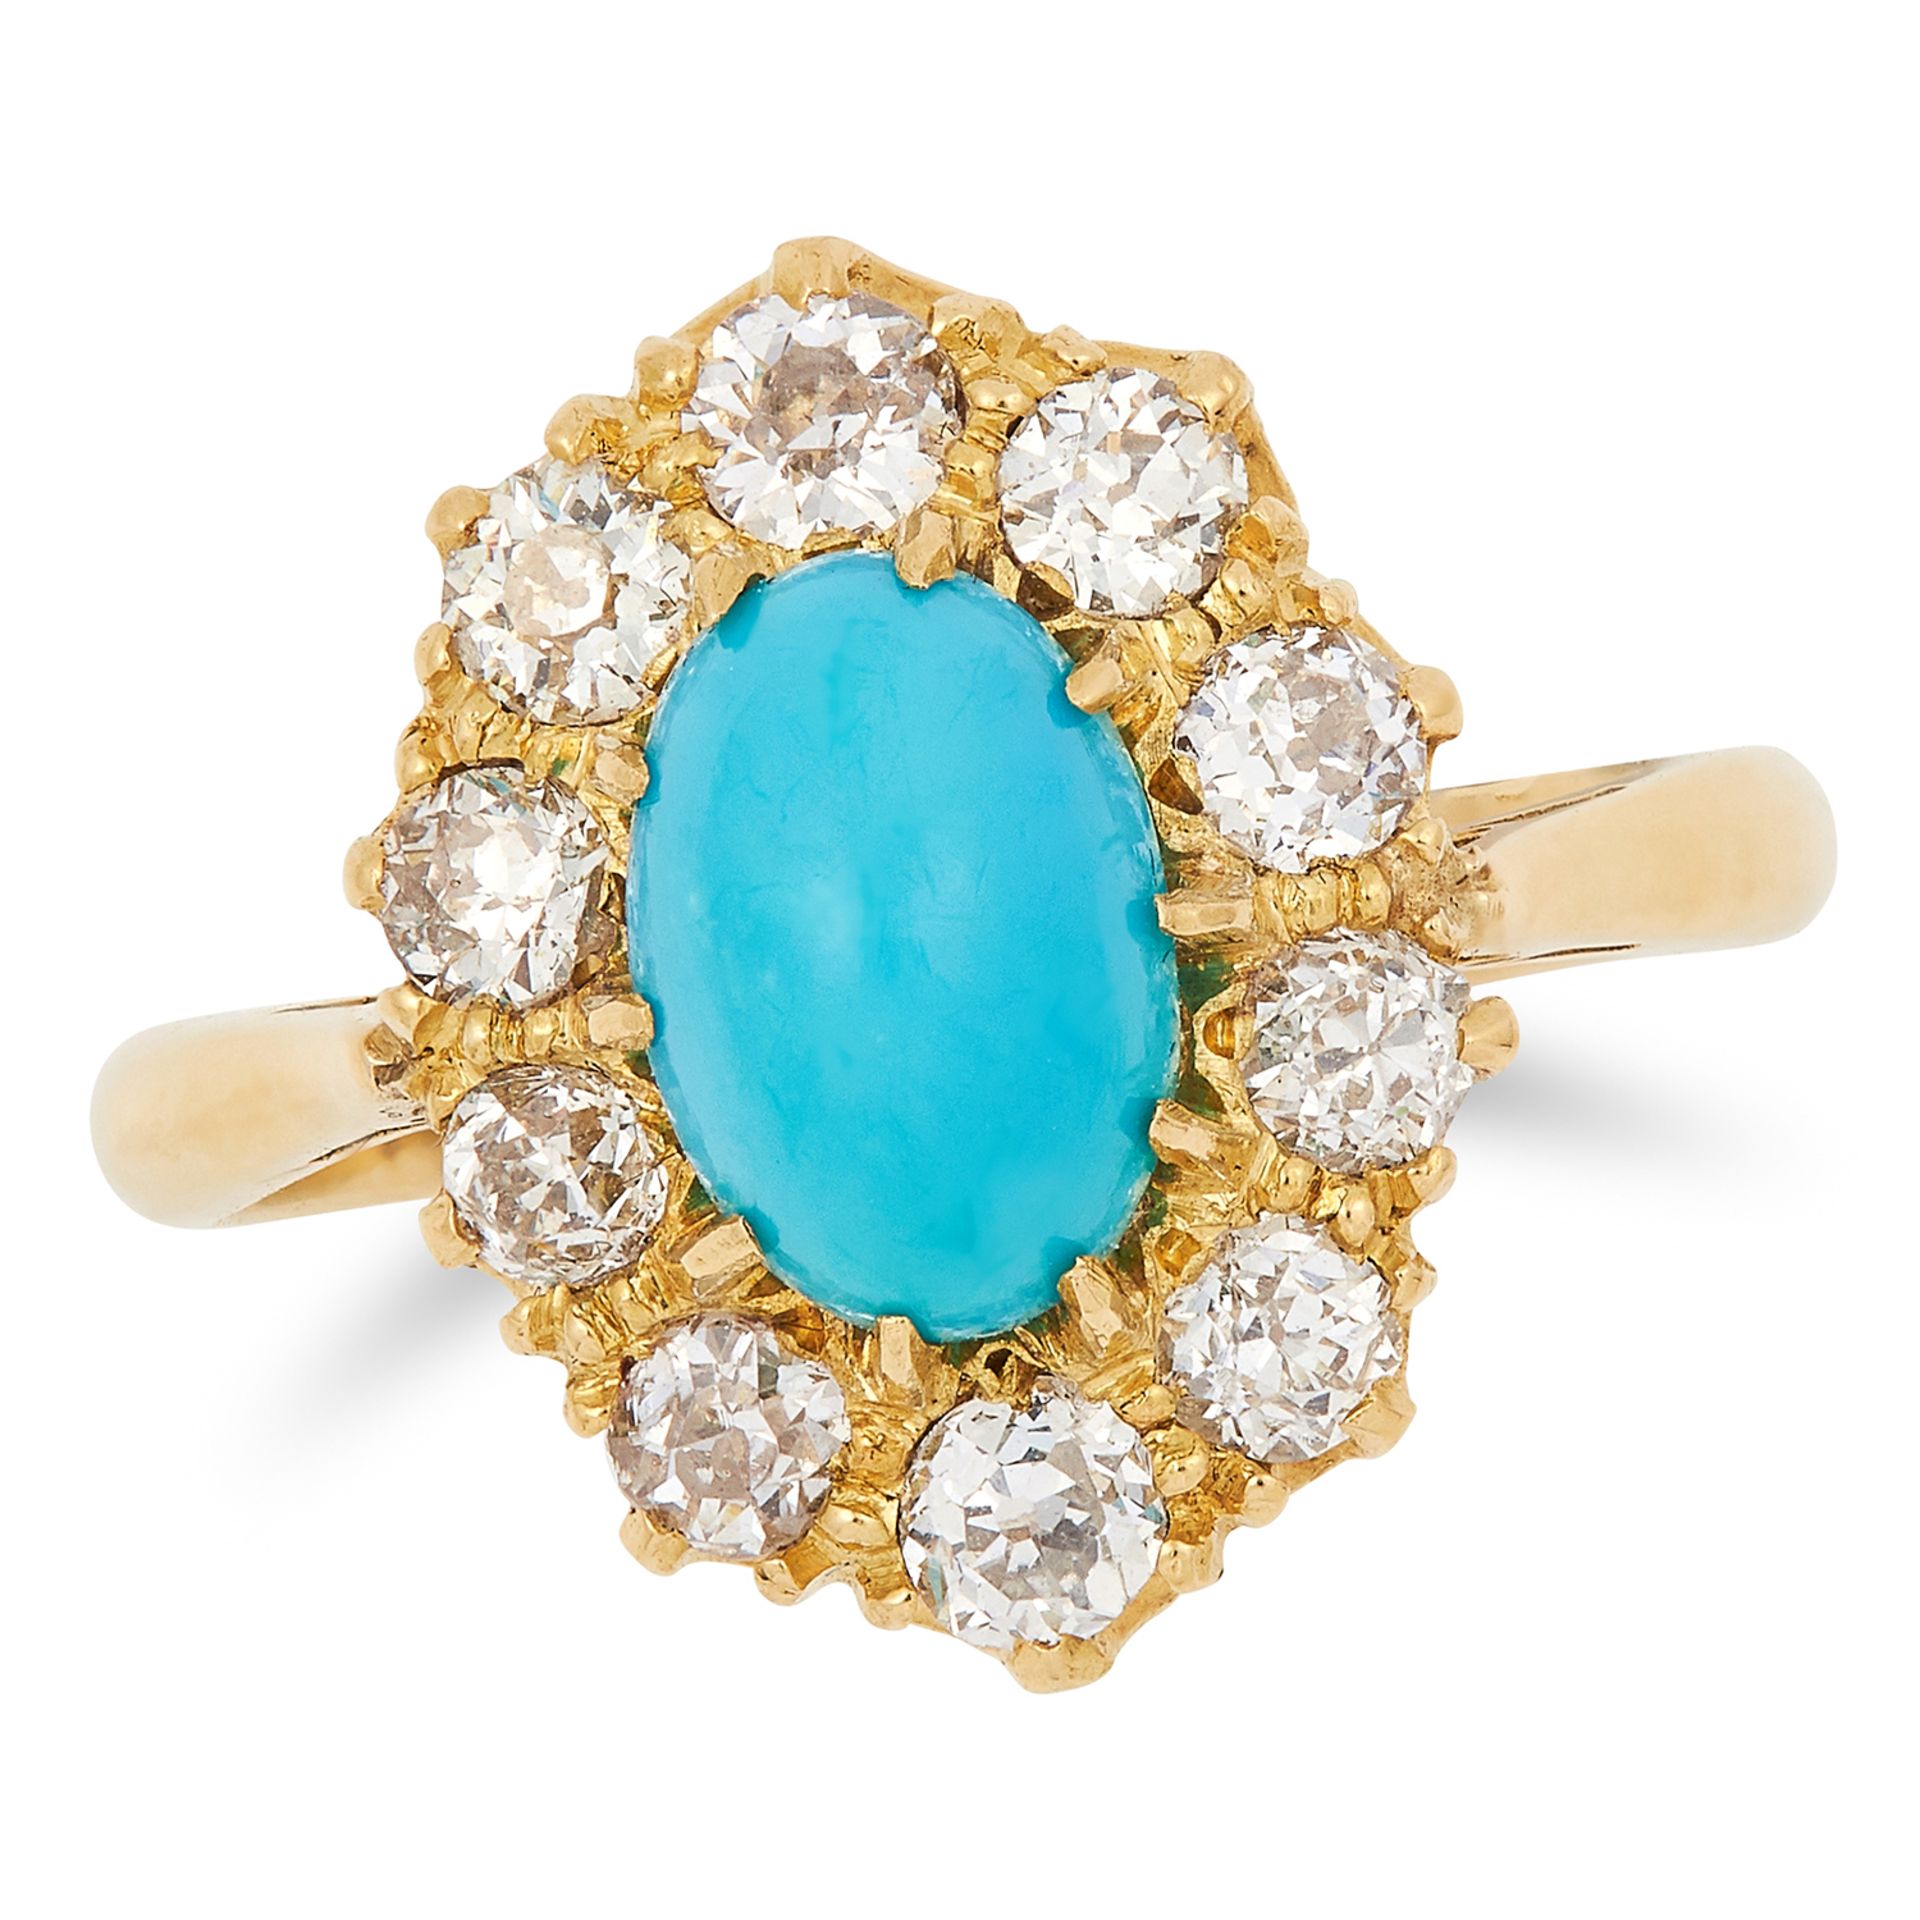 TURQUOISE AND DIAMOND CLUSTER RING set with a cabochon turquoise in a border of round cut